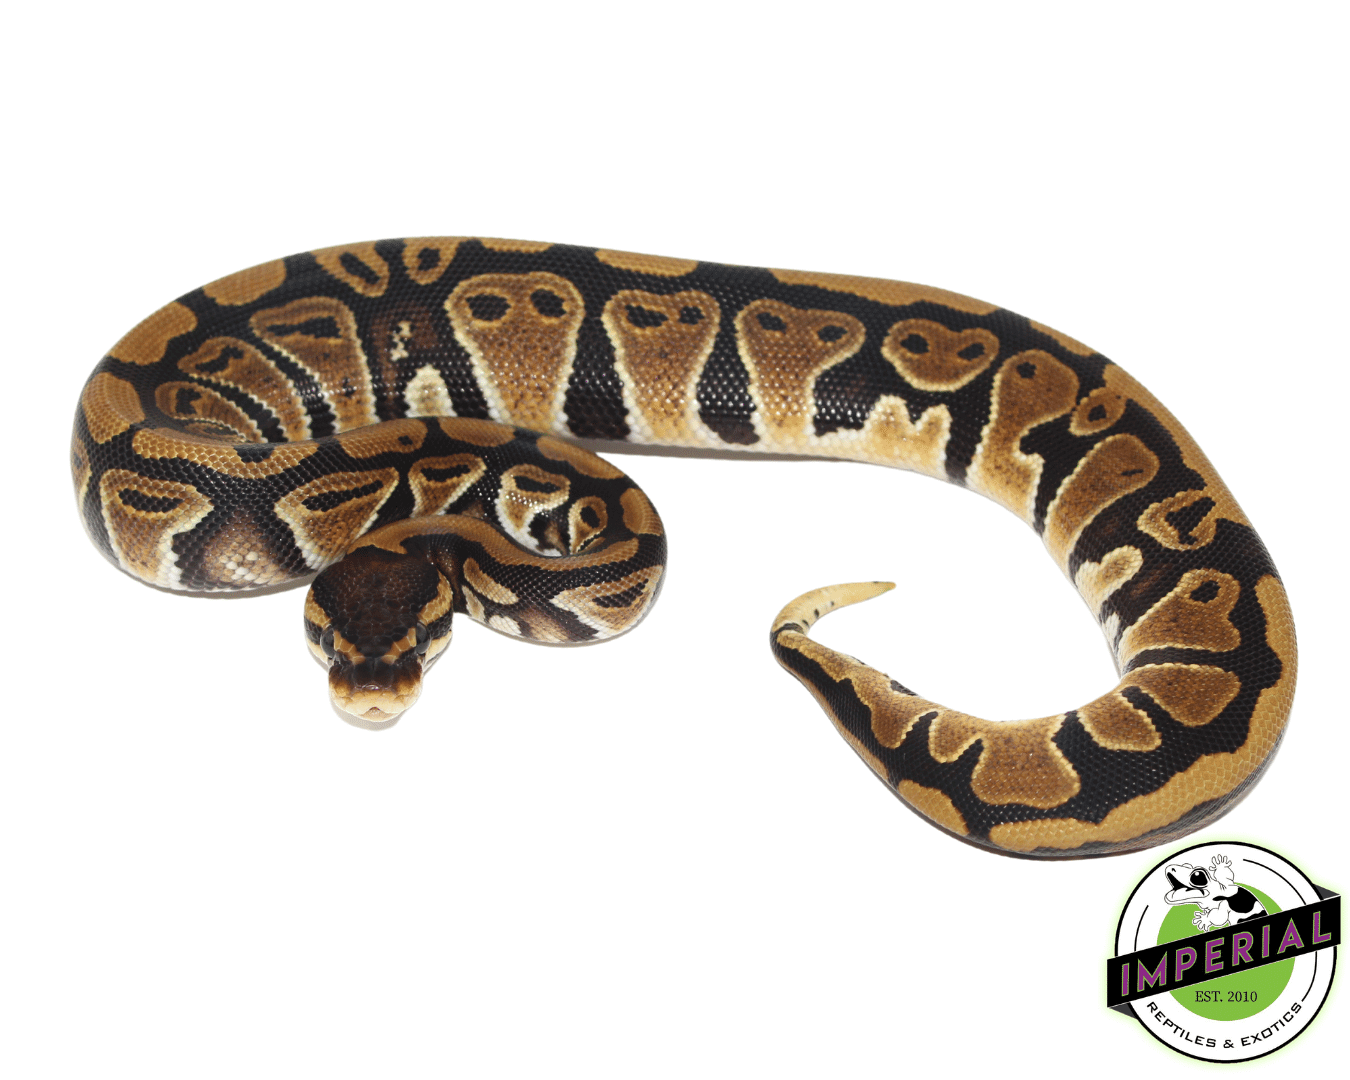 Jedi ball python for sale, buy reptiles online